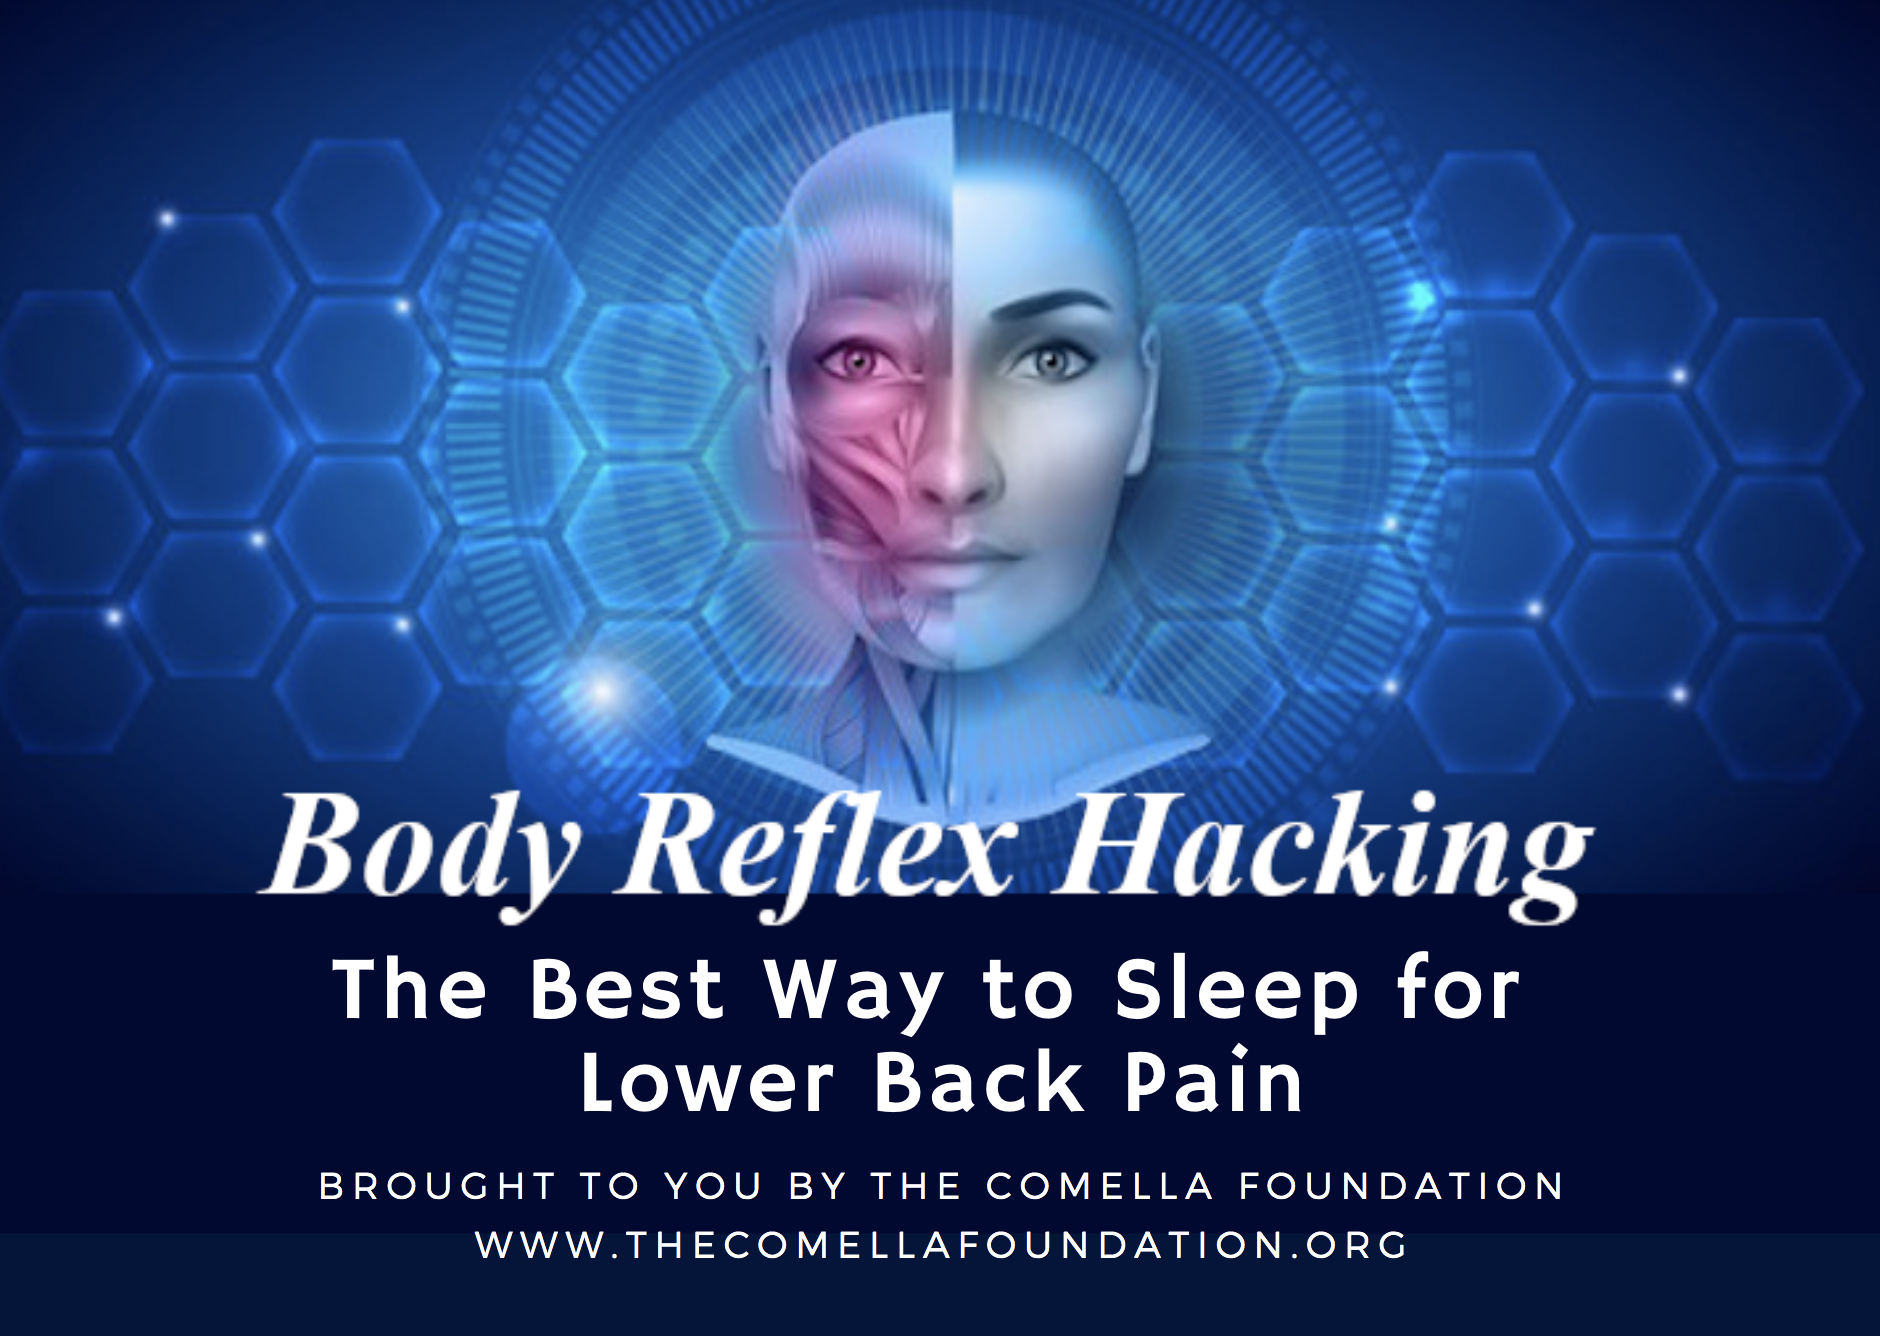 Body Reflex Hacking: Best way to sleep for lower back pain